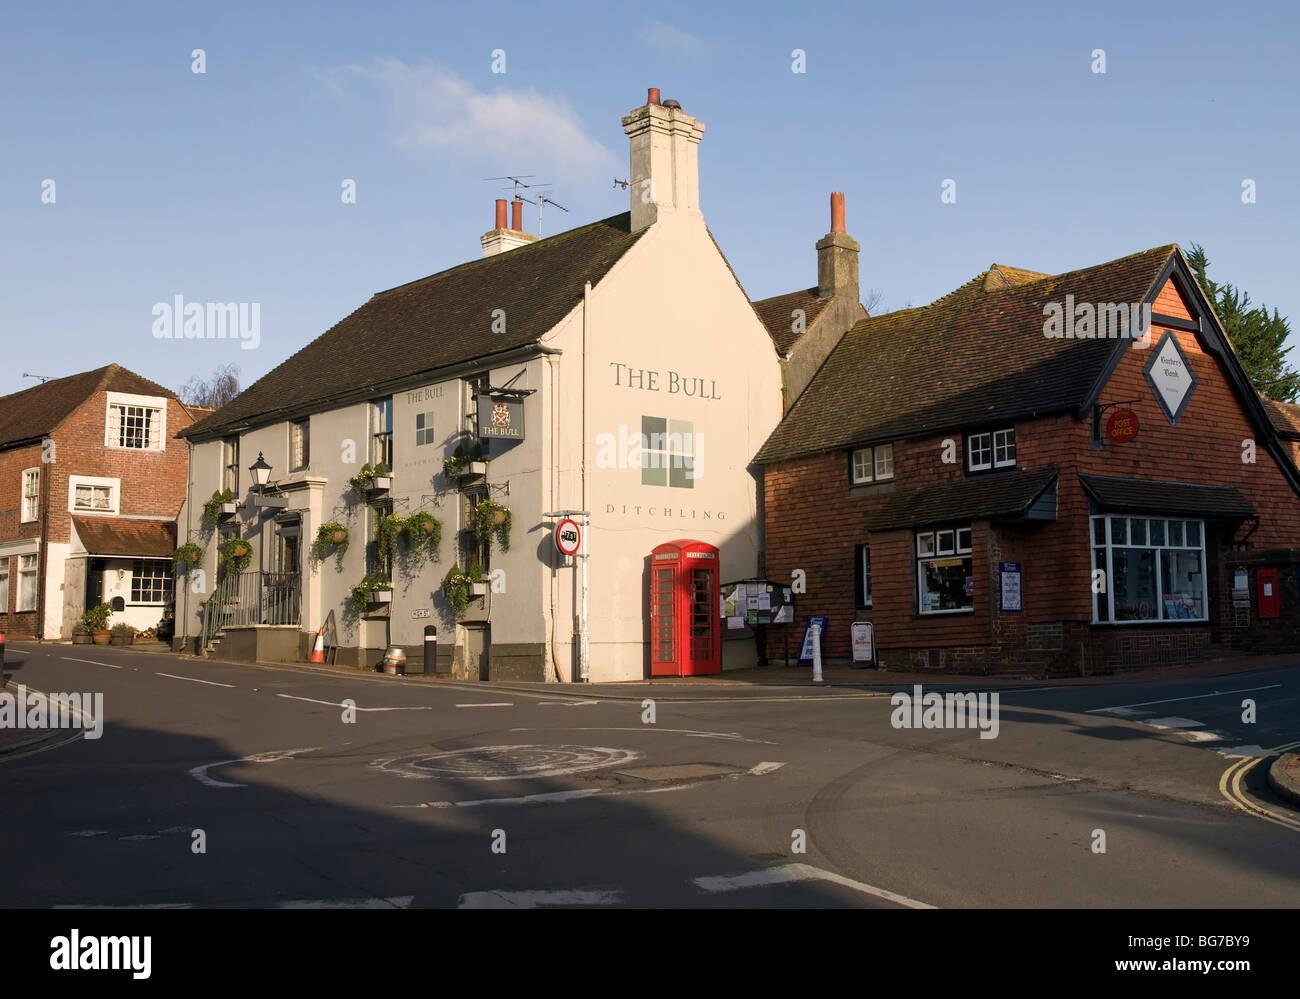 The Bull Pub and the post office, in Ditchling, Sussex, England. Stock Photo